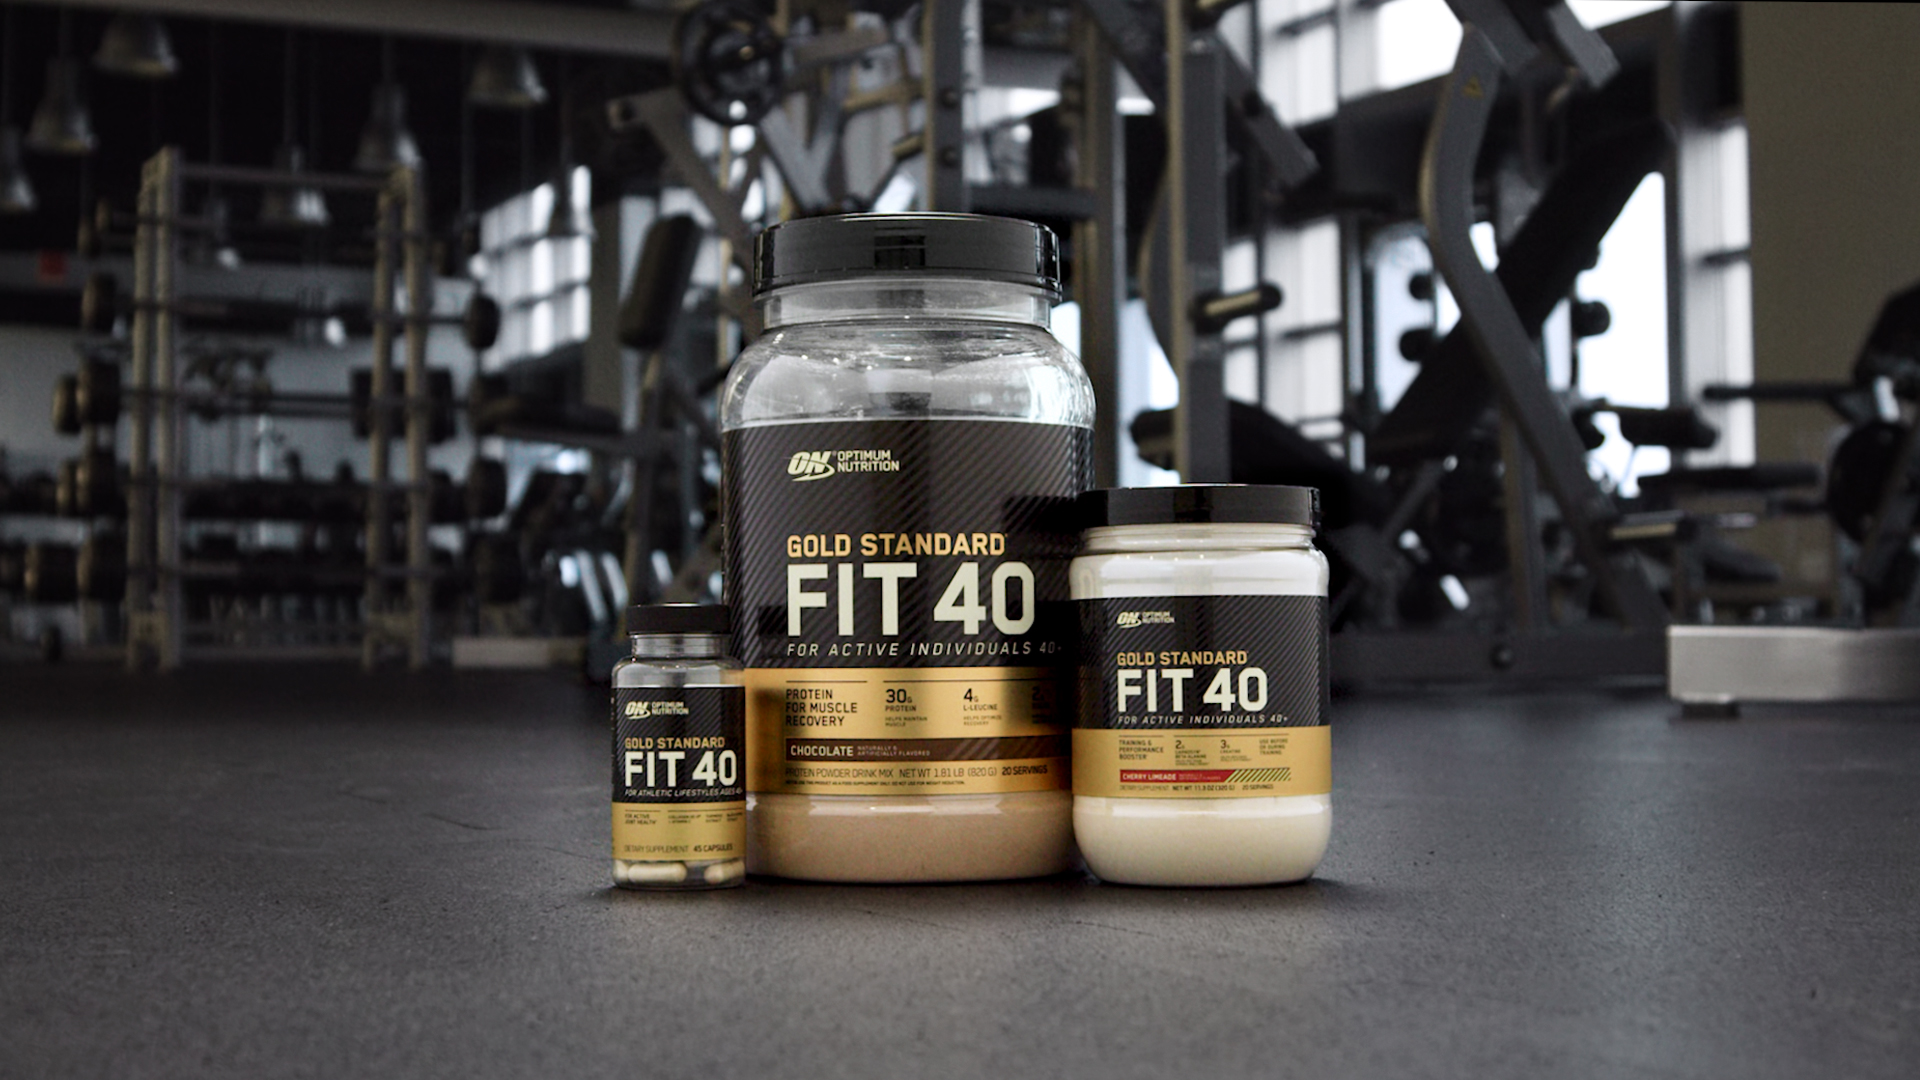 fitness plus store has a wide range of supplements to chose from